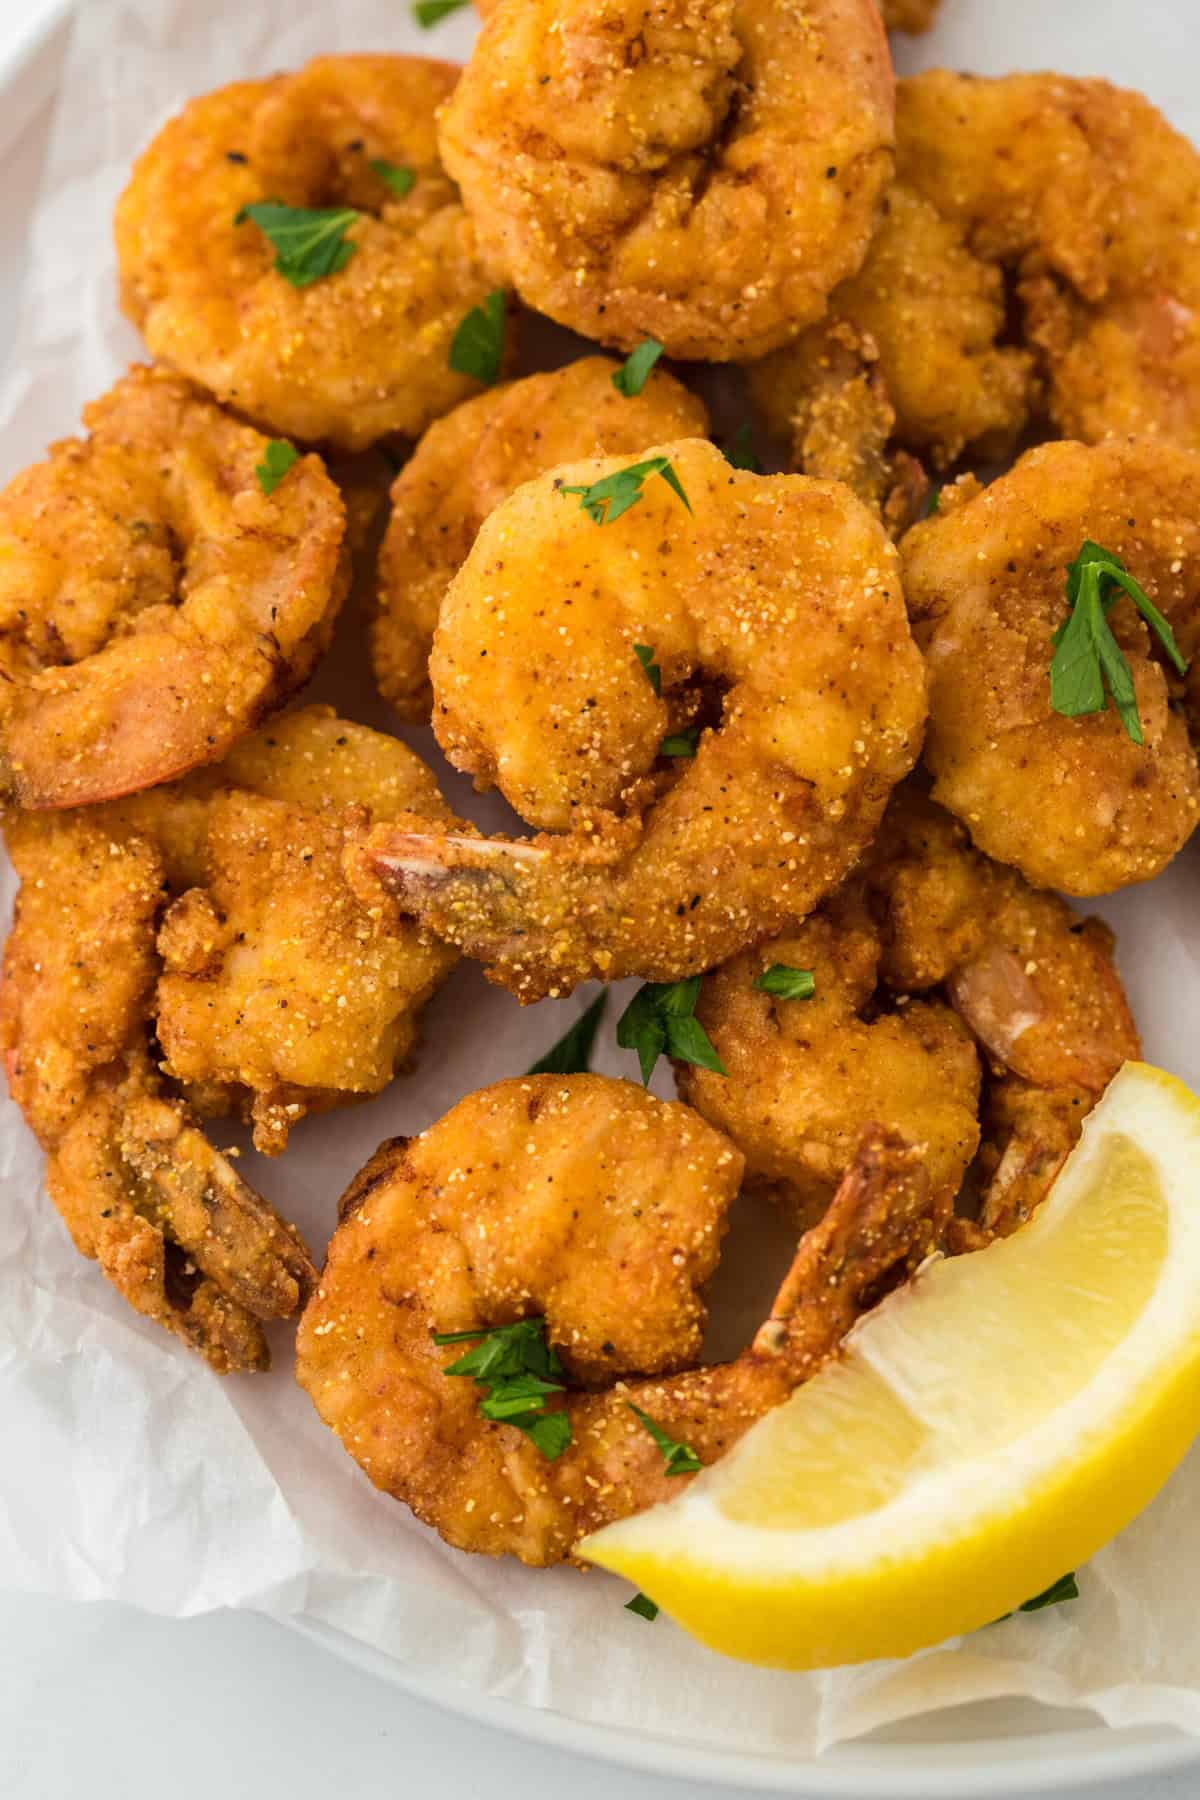 Southern Fried shrimp on a white platter with a lemon wedge ready to enjoy